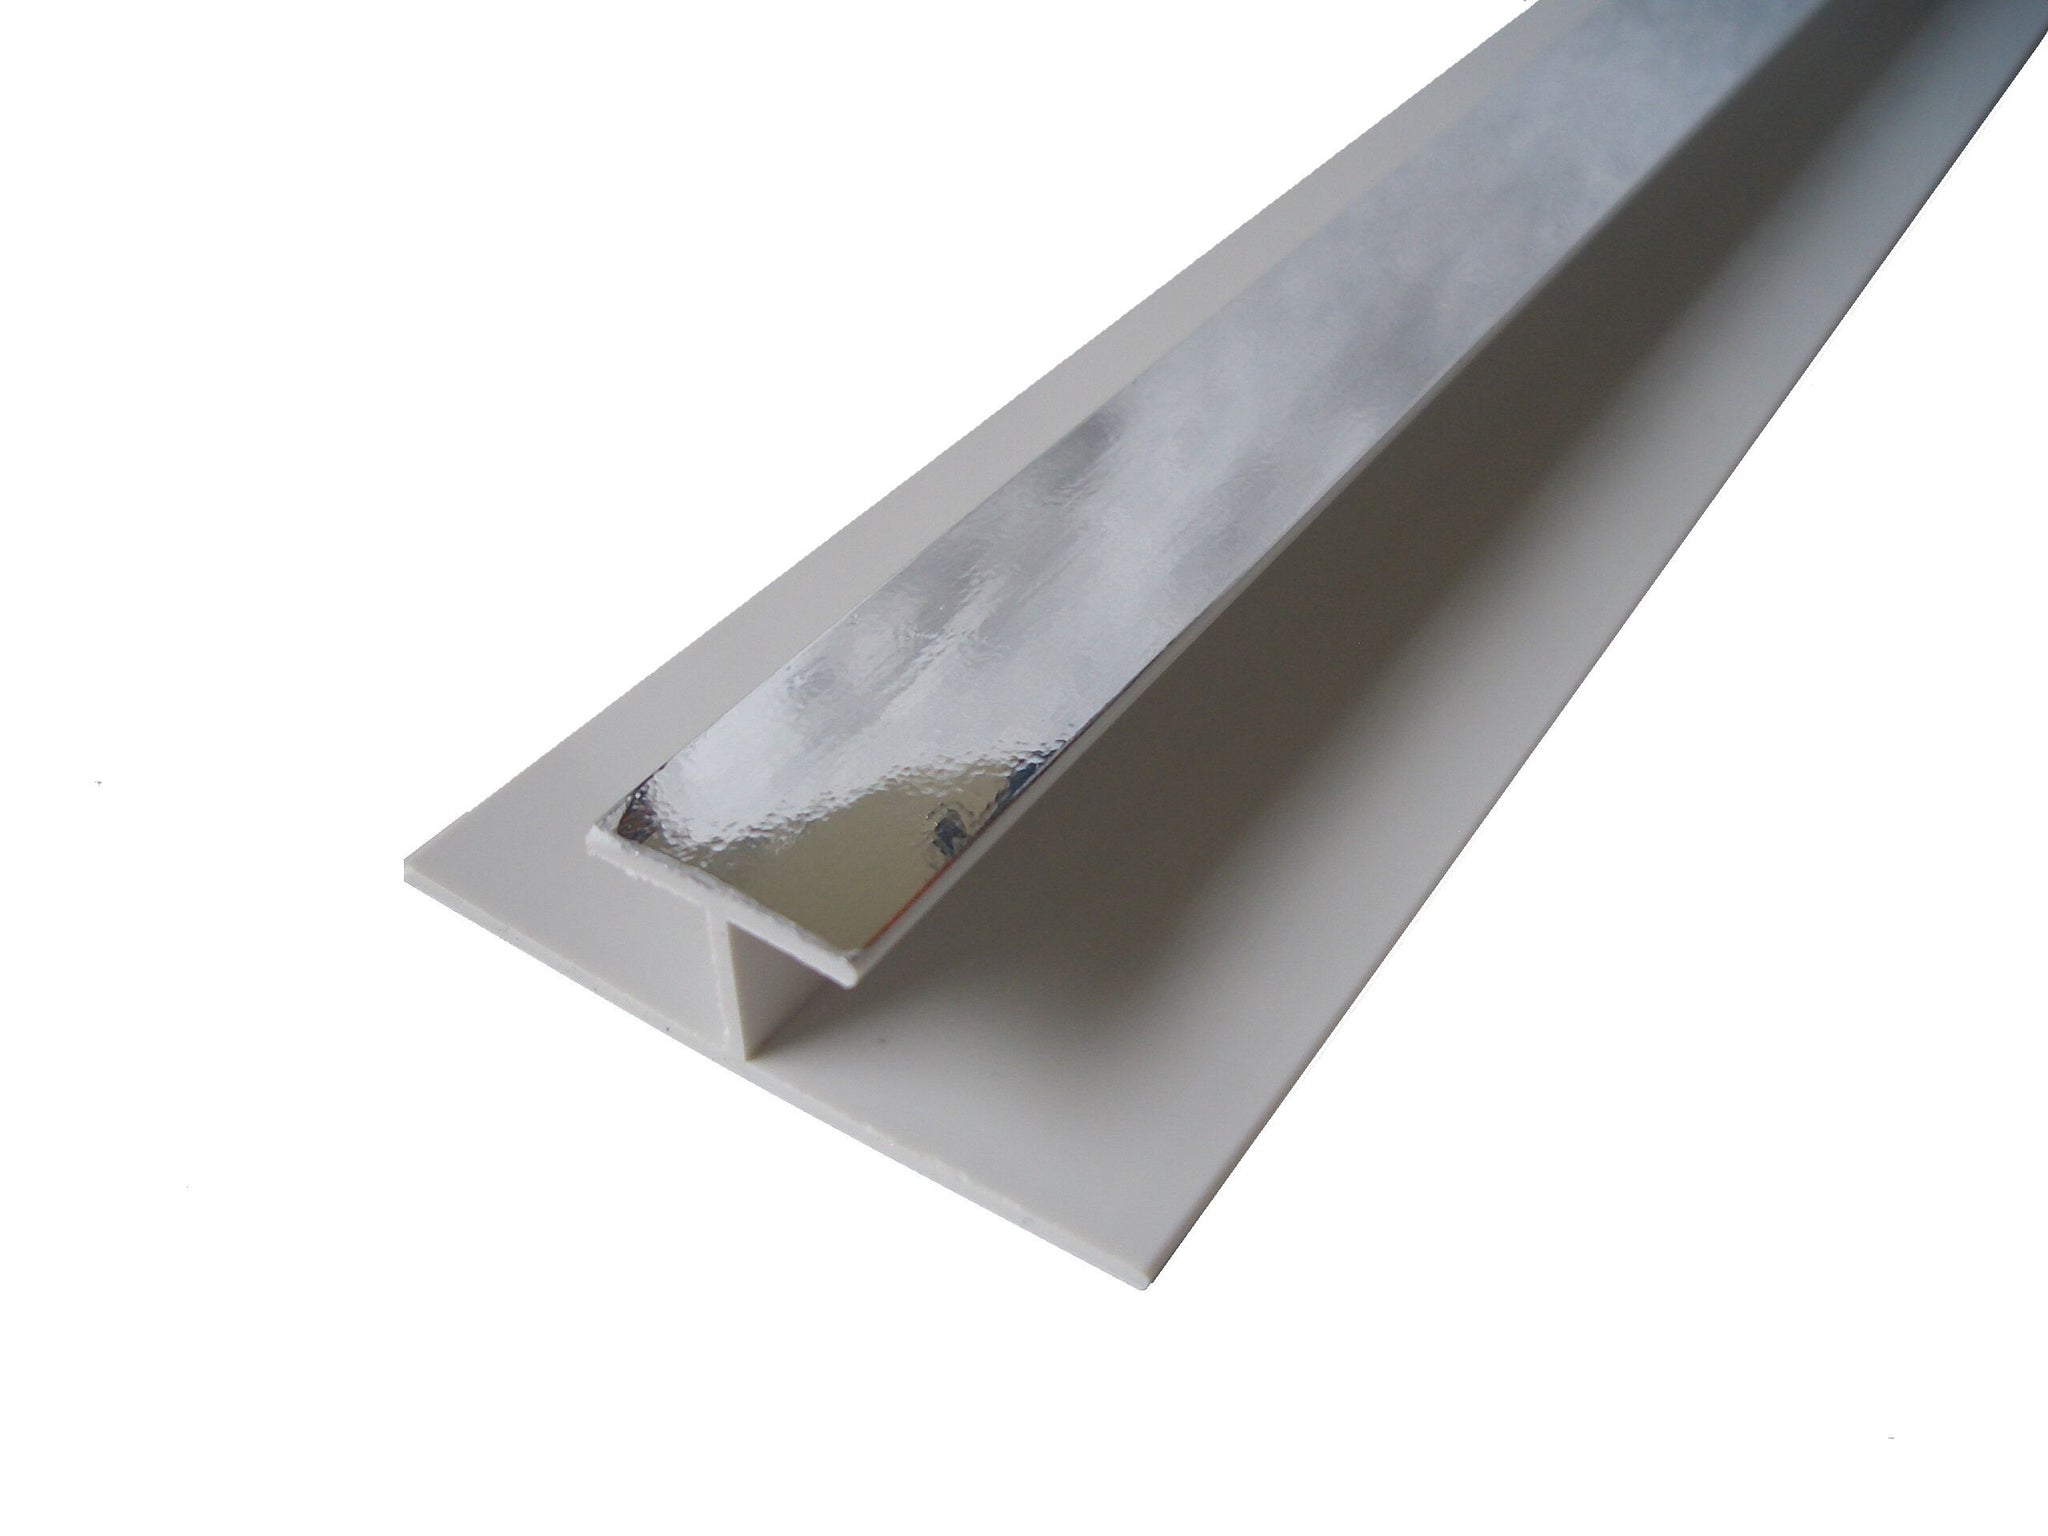 H Trim Chrome Finish 10mm For Cladding Wall Panels 2.4m Long